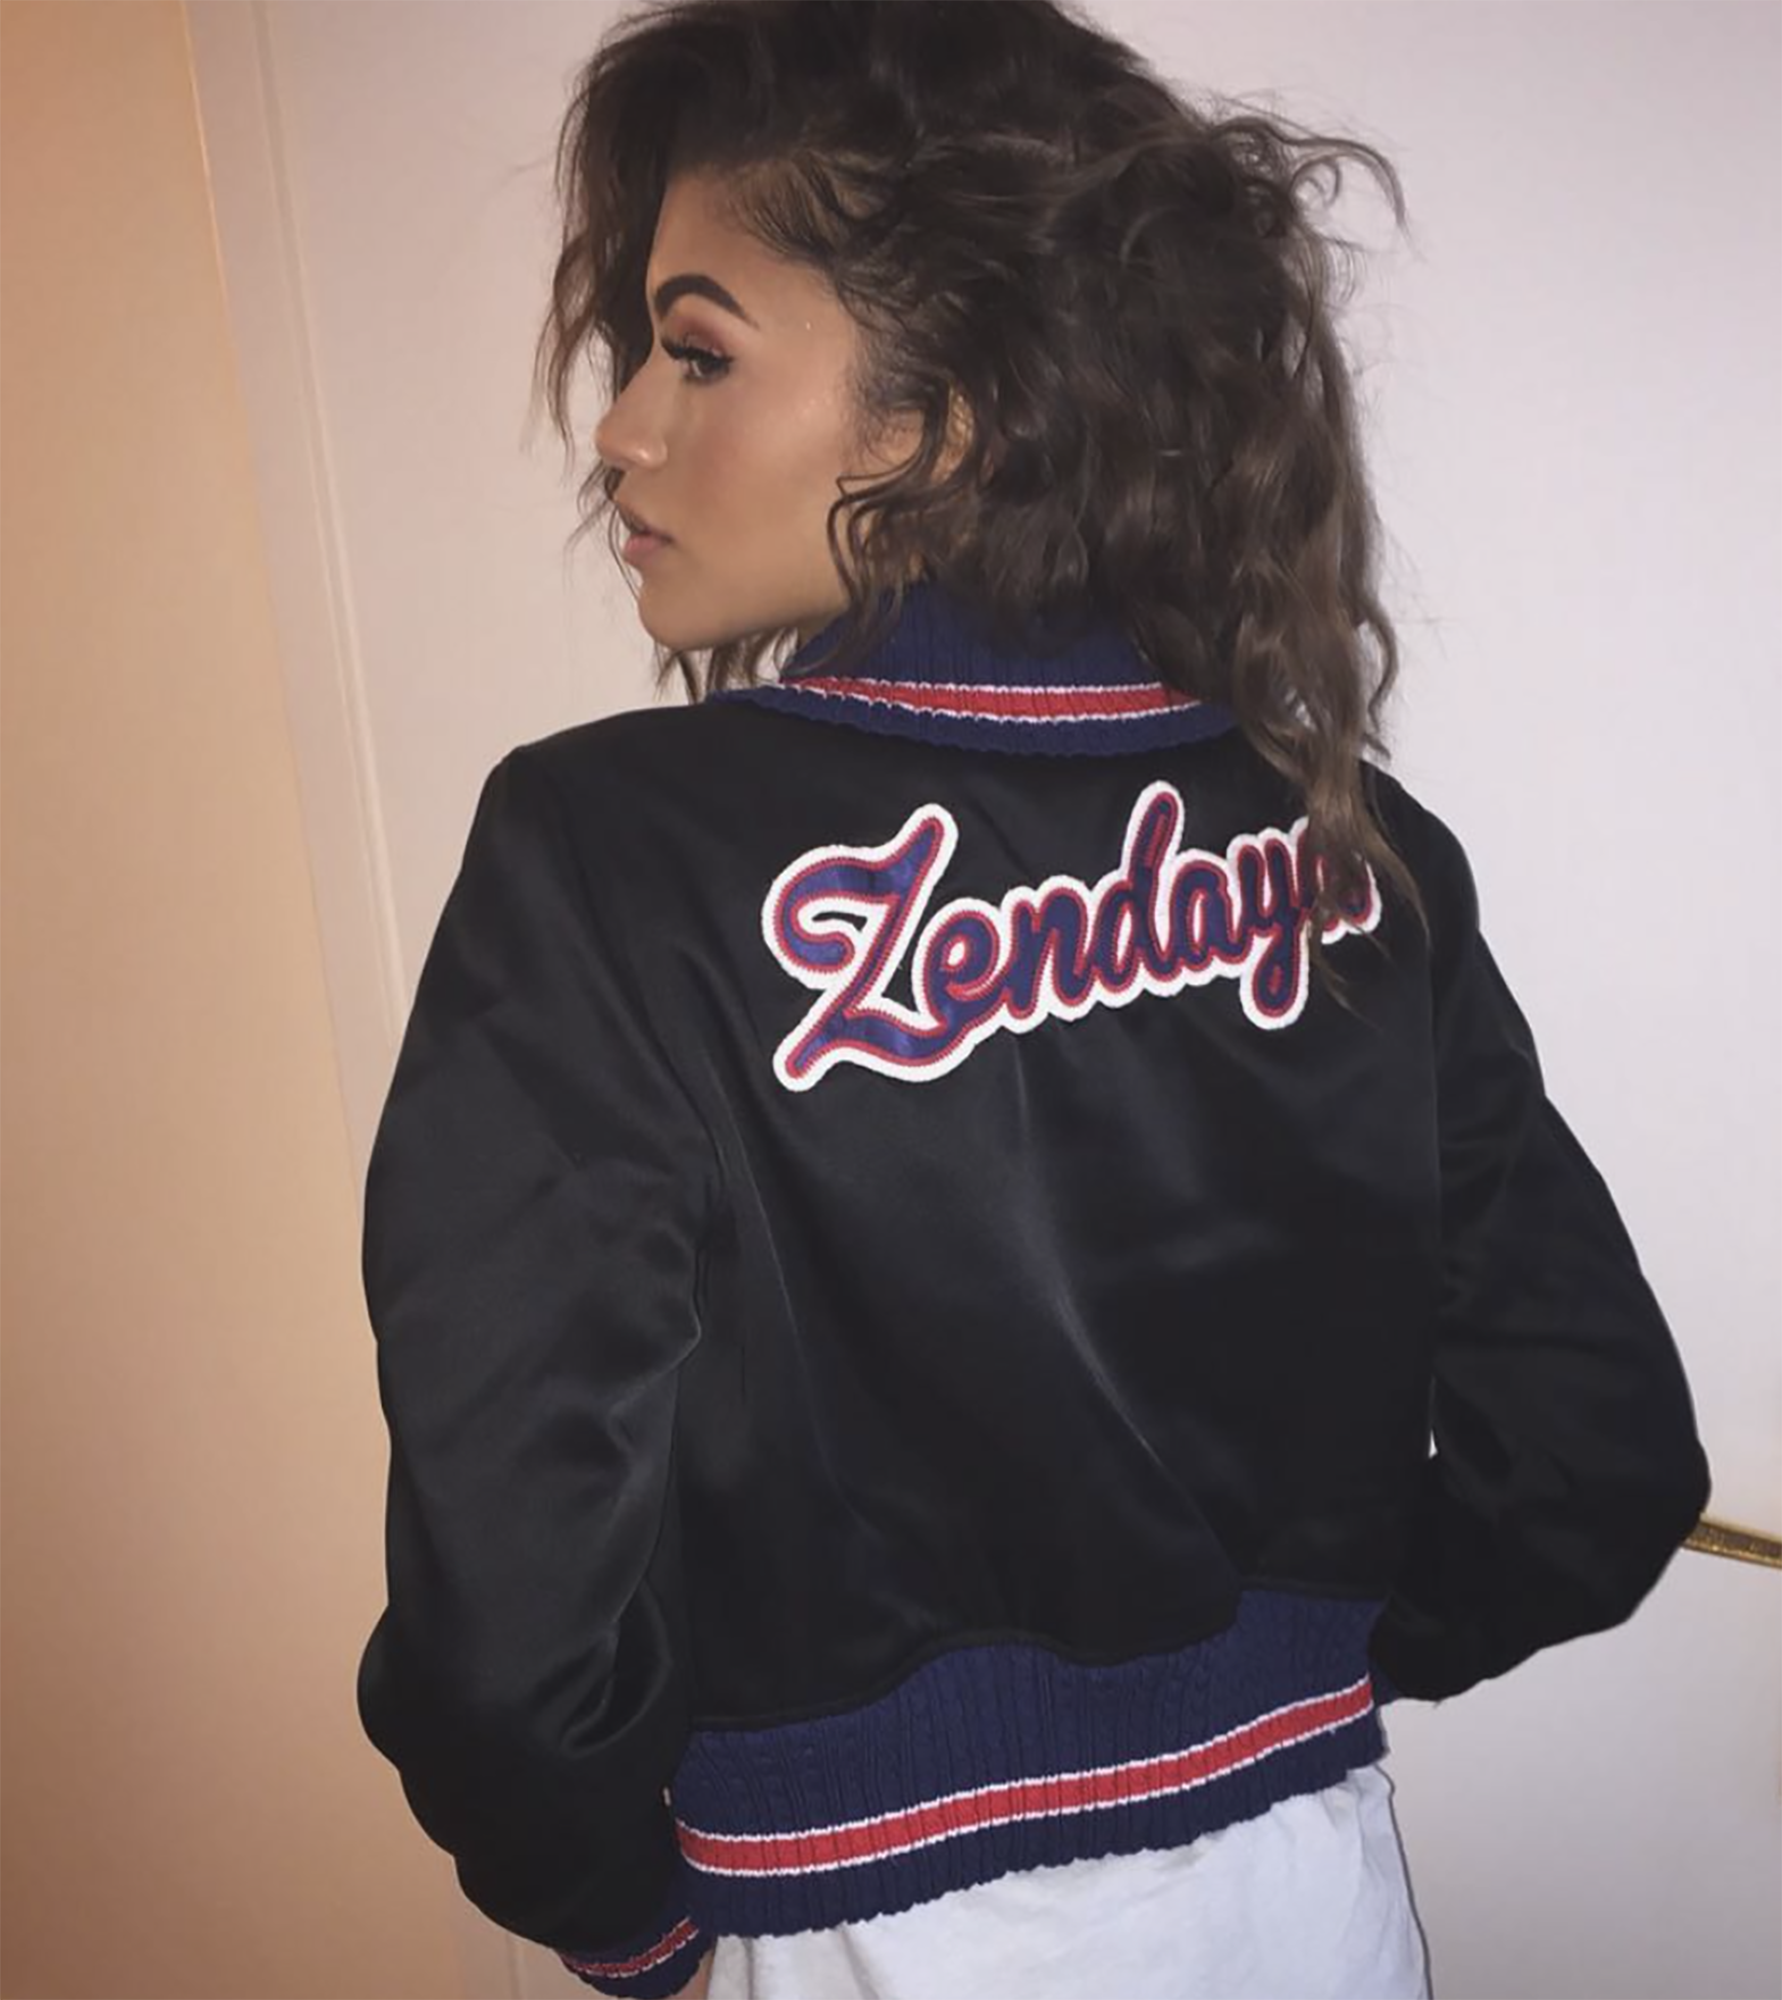 Five things you need to know about Zendaya